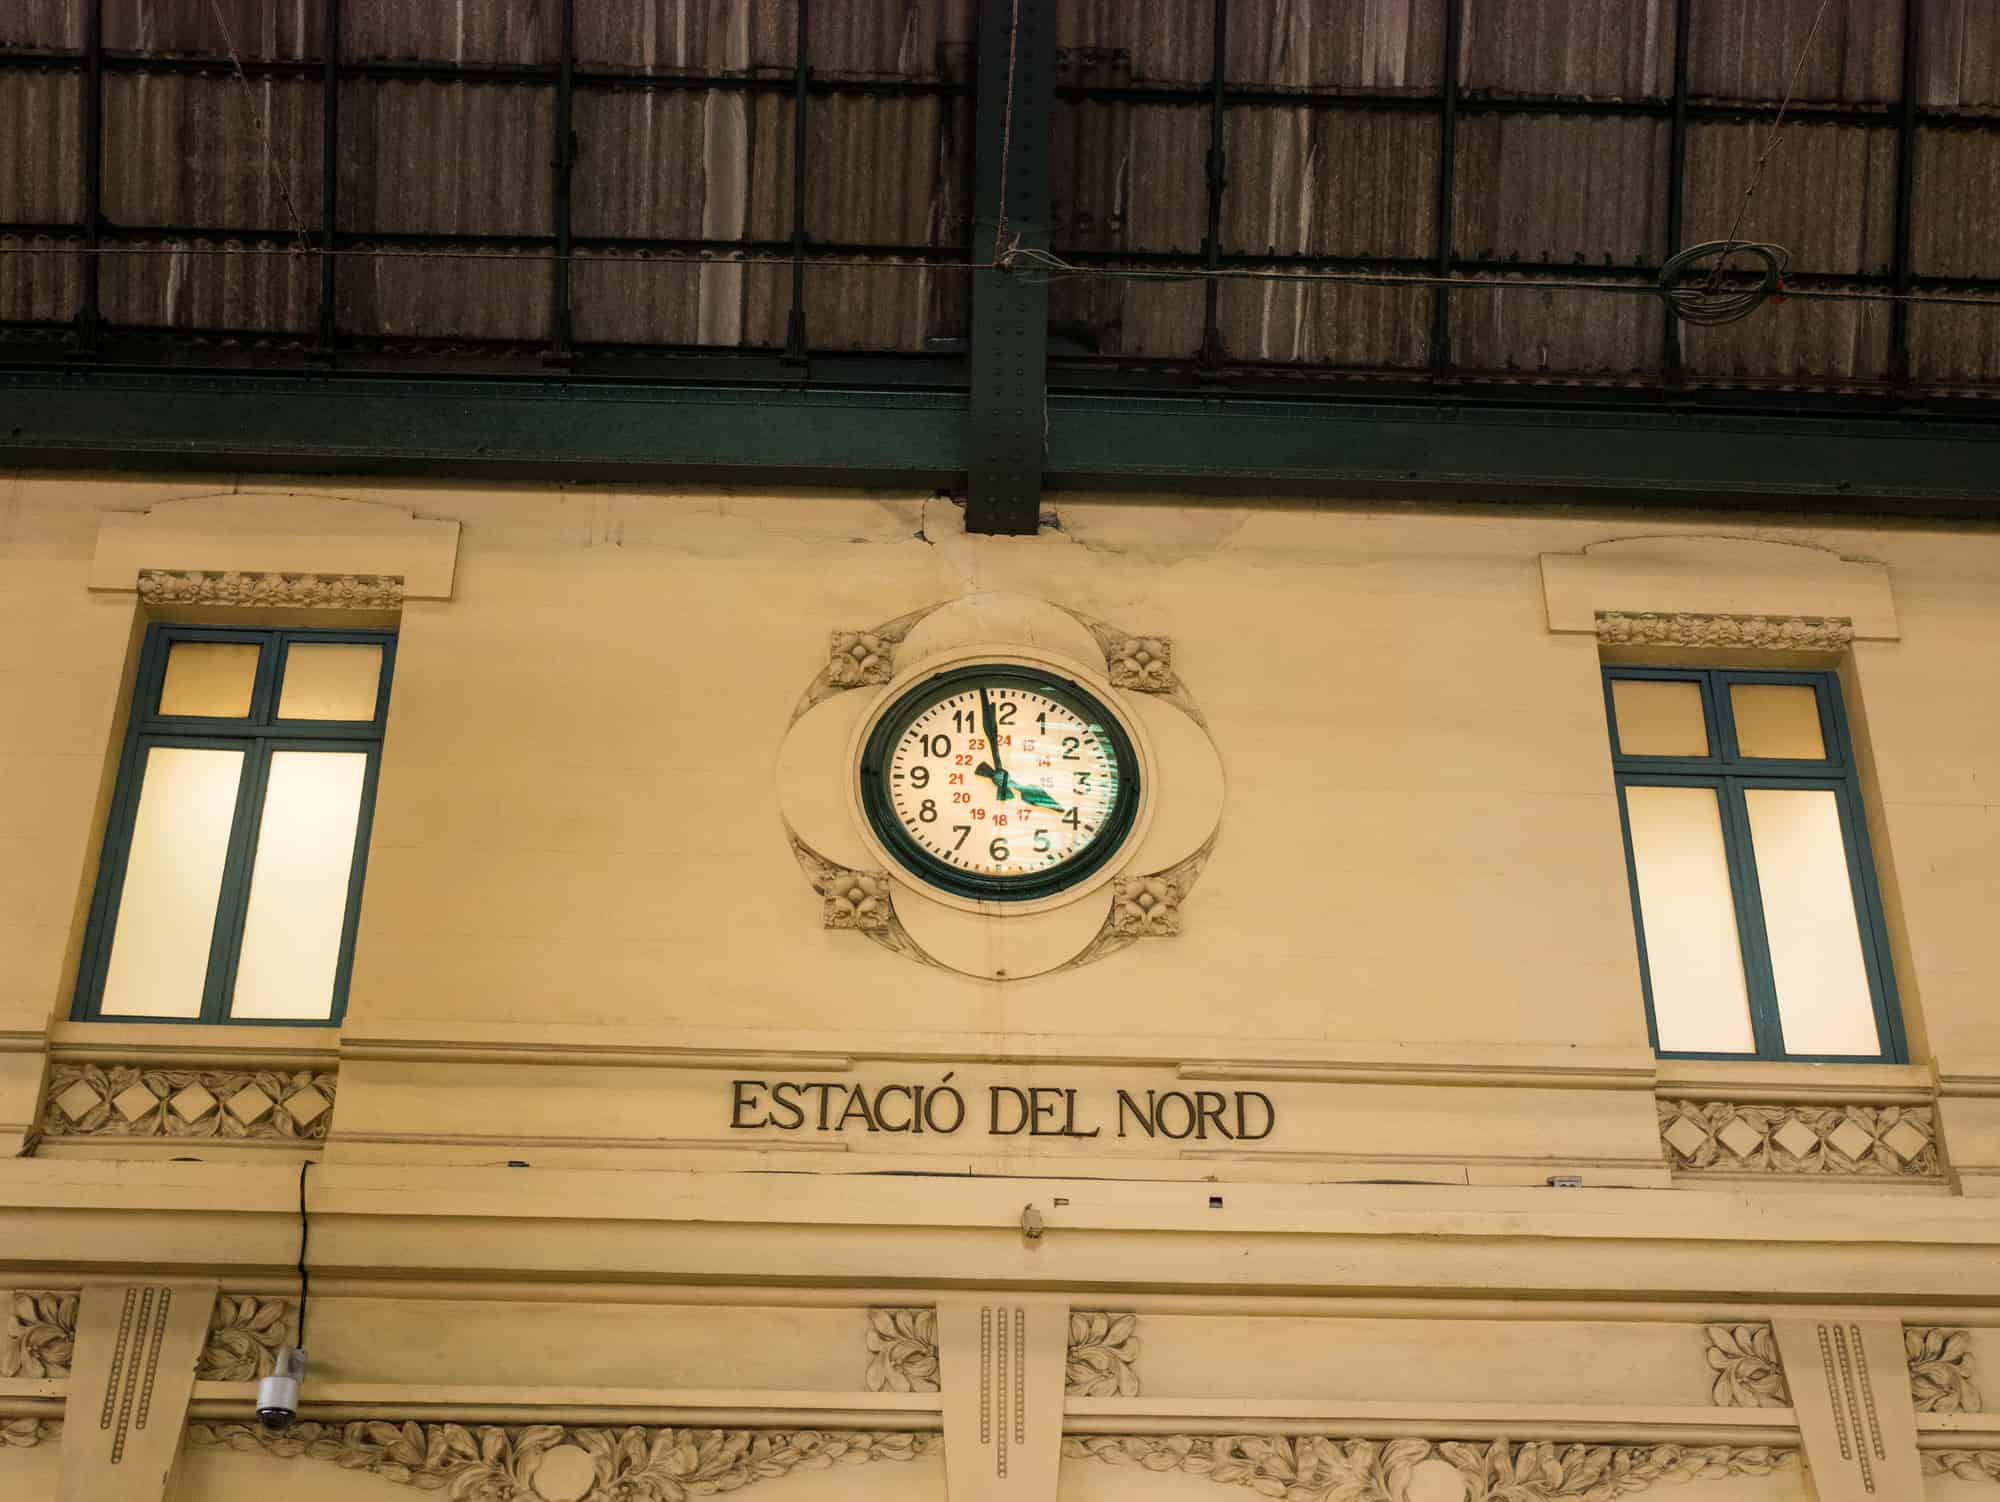 Wall clock in north train station in Valencia, spain